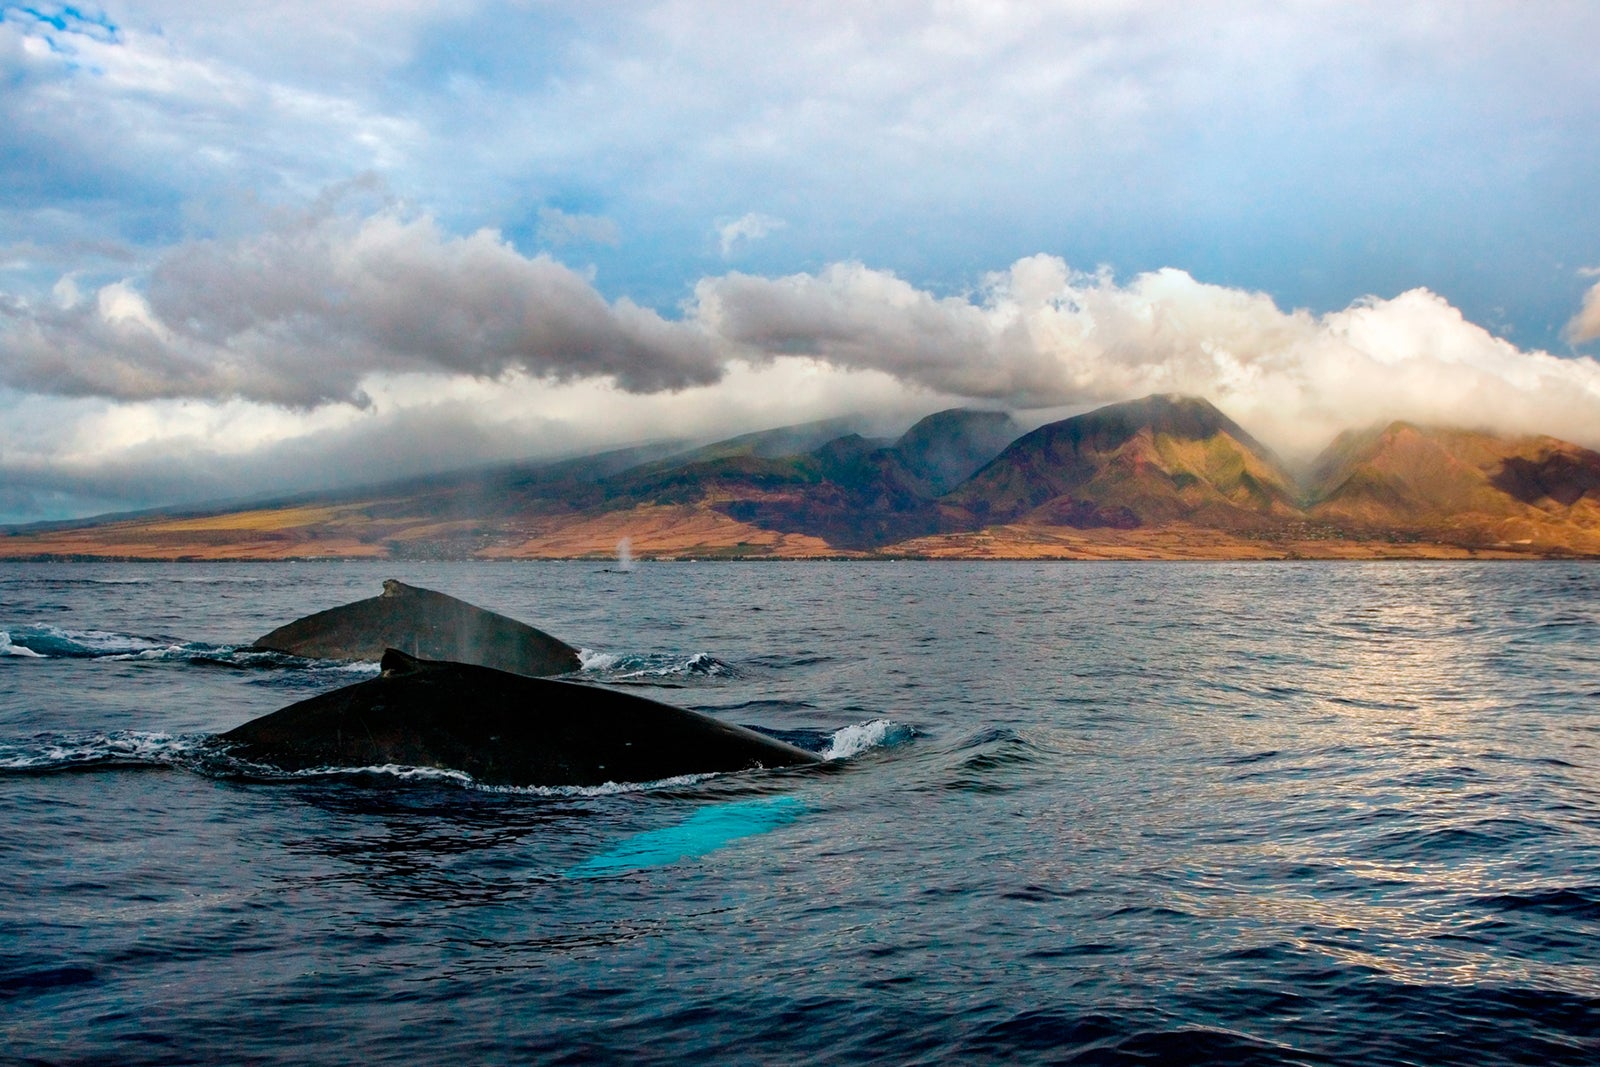 A pair of whales breaching the water off the coast of Hawaii